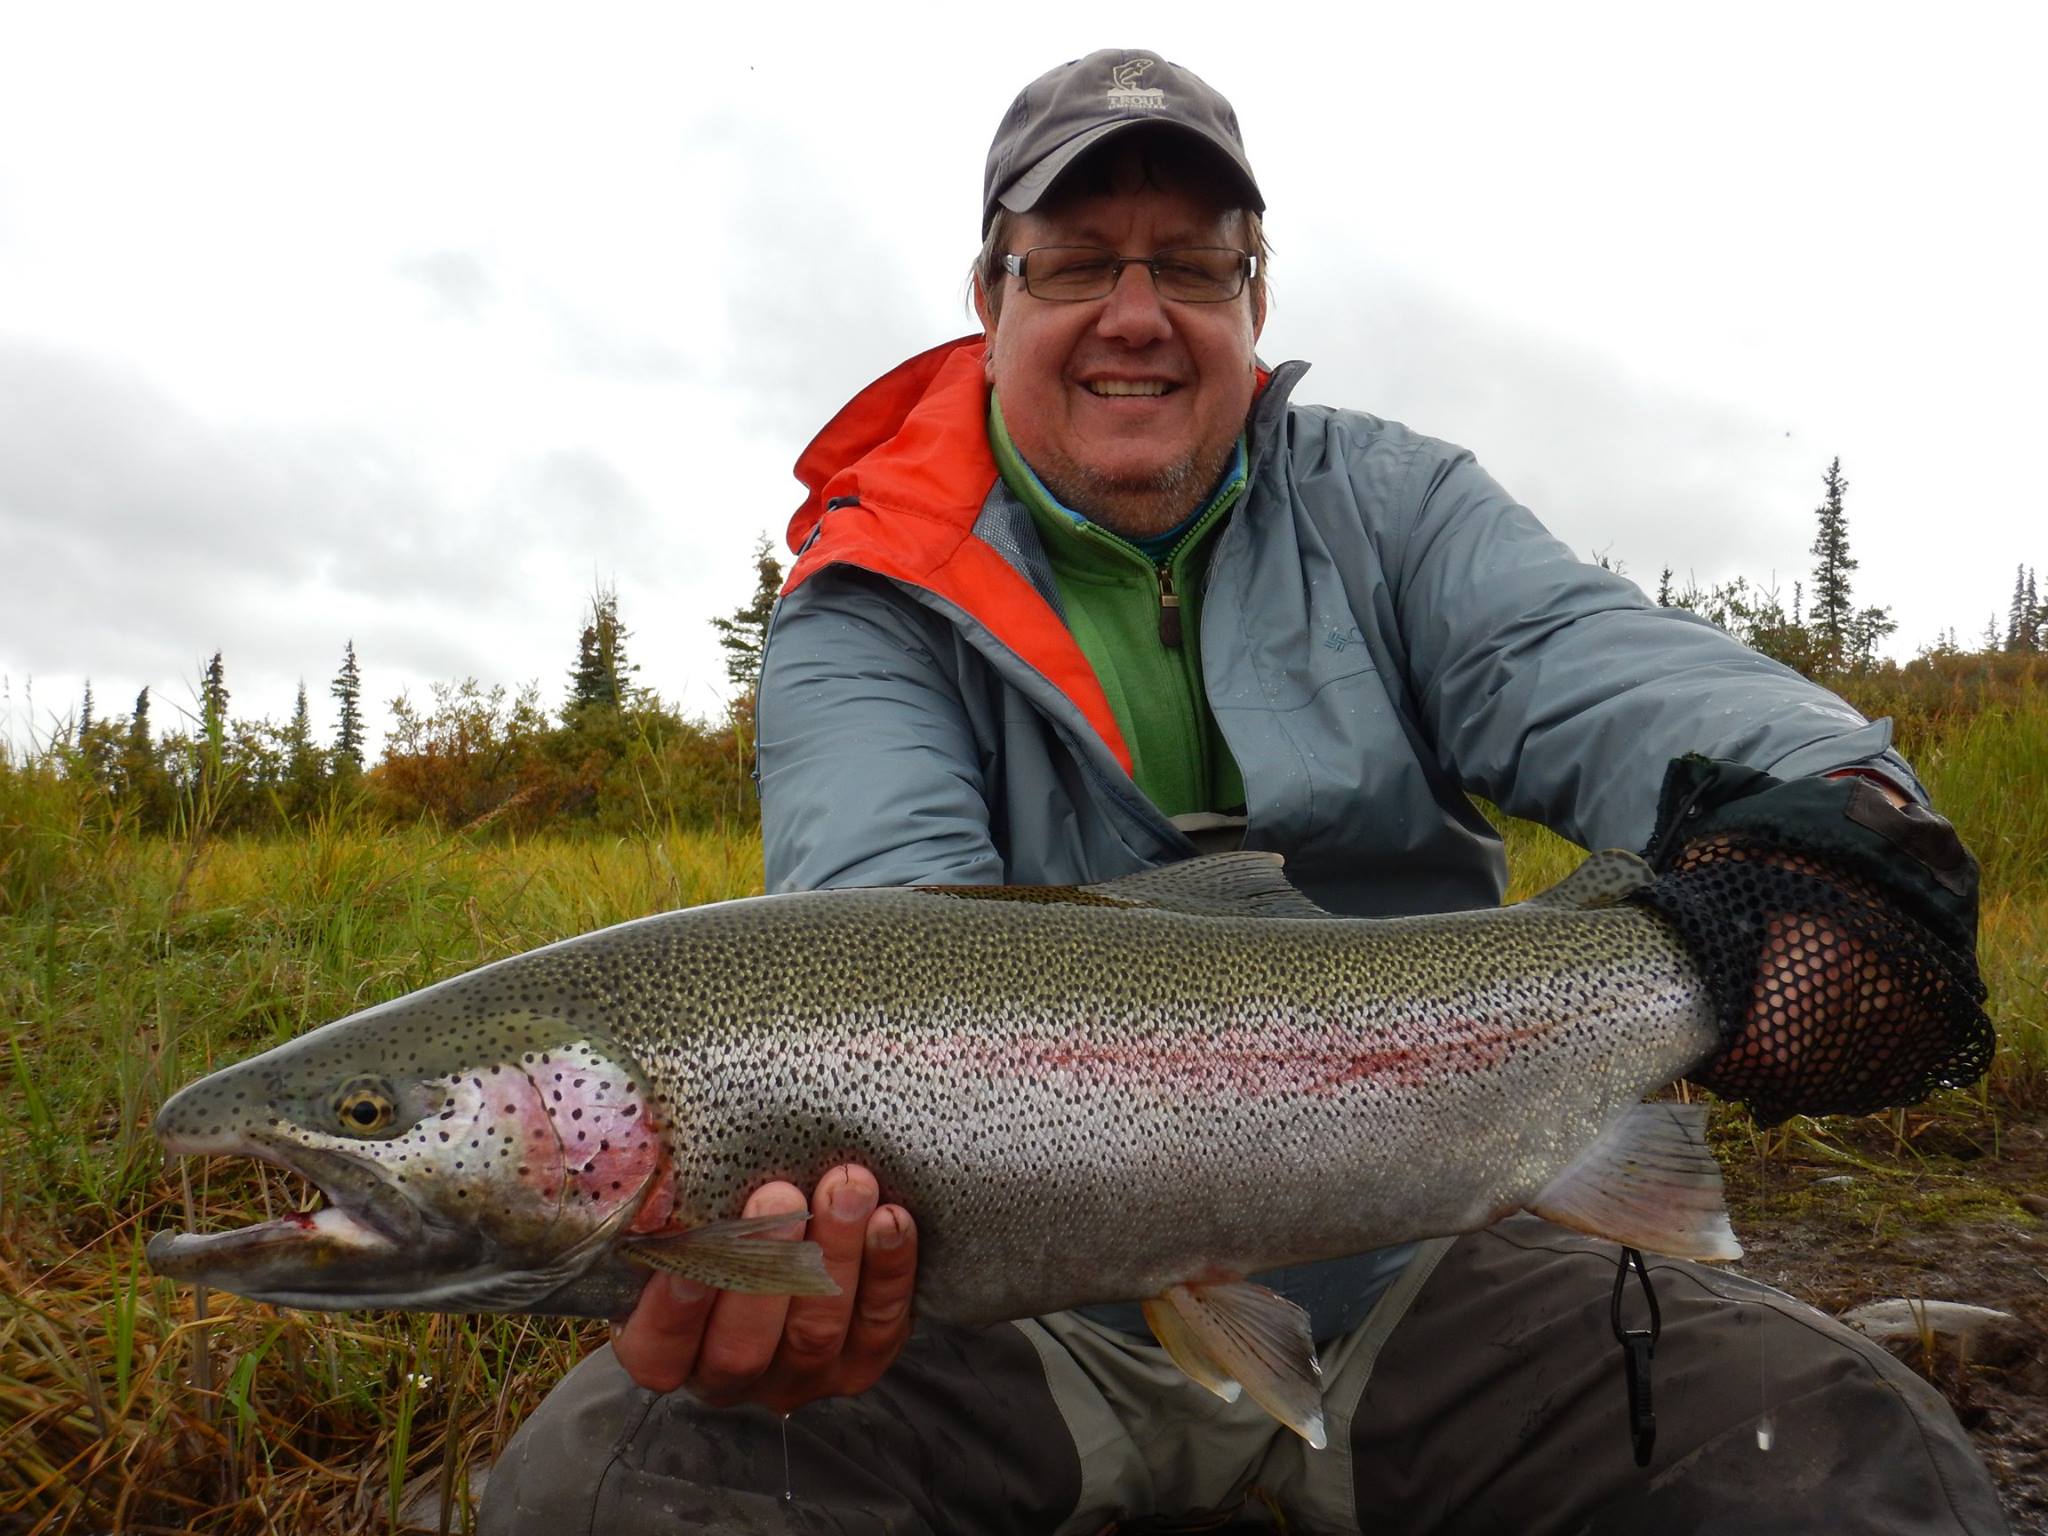 Premier Florida Fishing Guide, James Cronk travels to Alaska to guest guide.